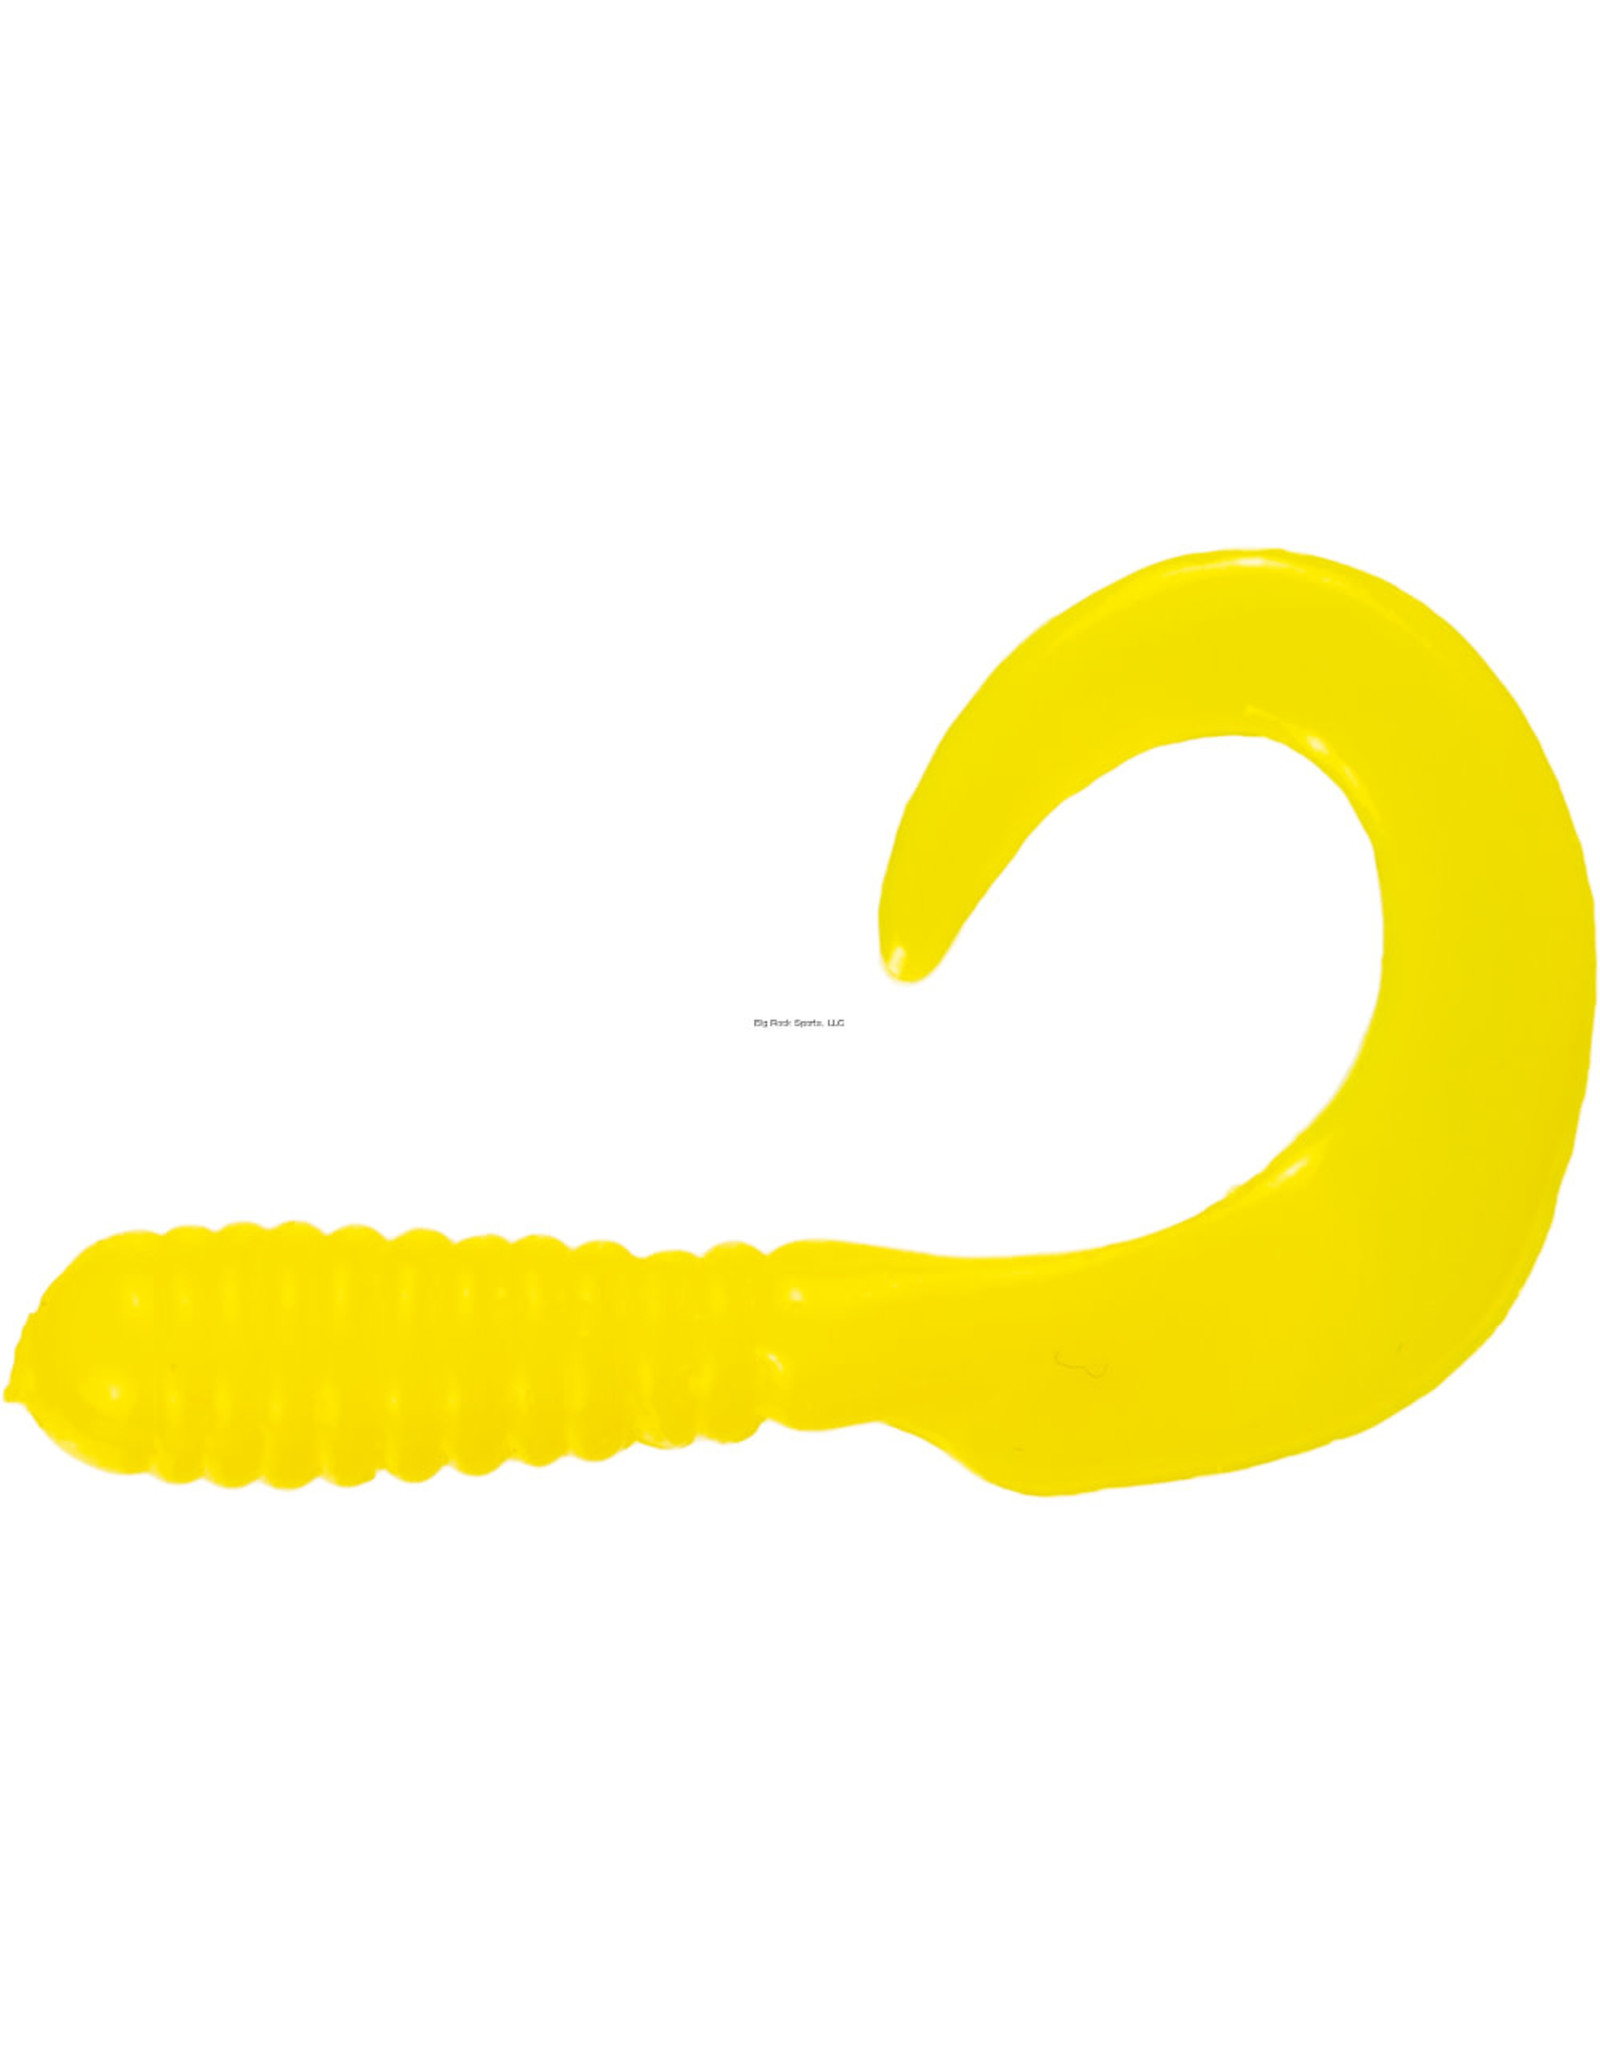 Jerry's 2" Assault Grub - Yellow - 20 Count